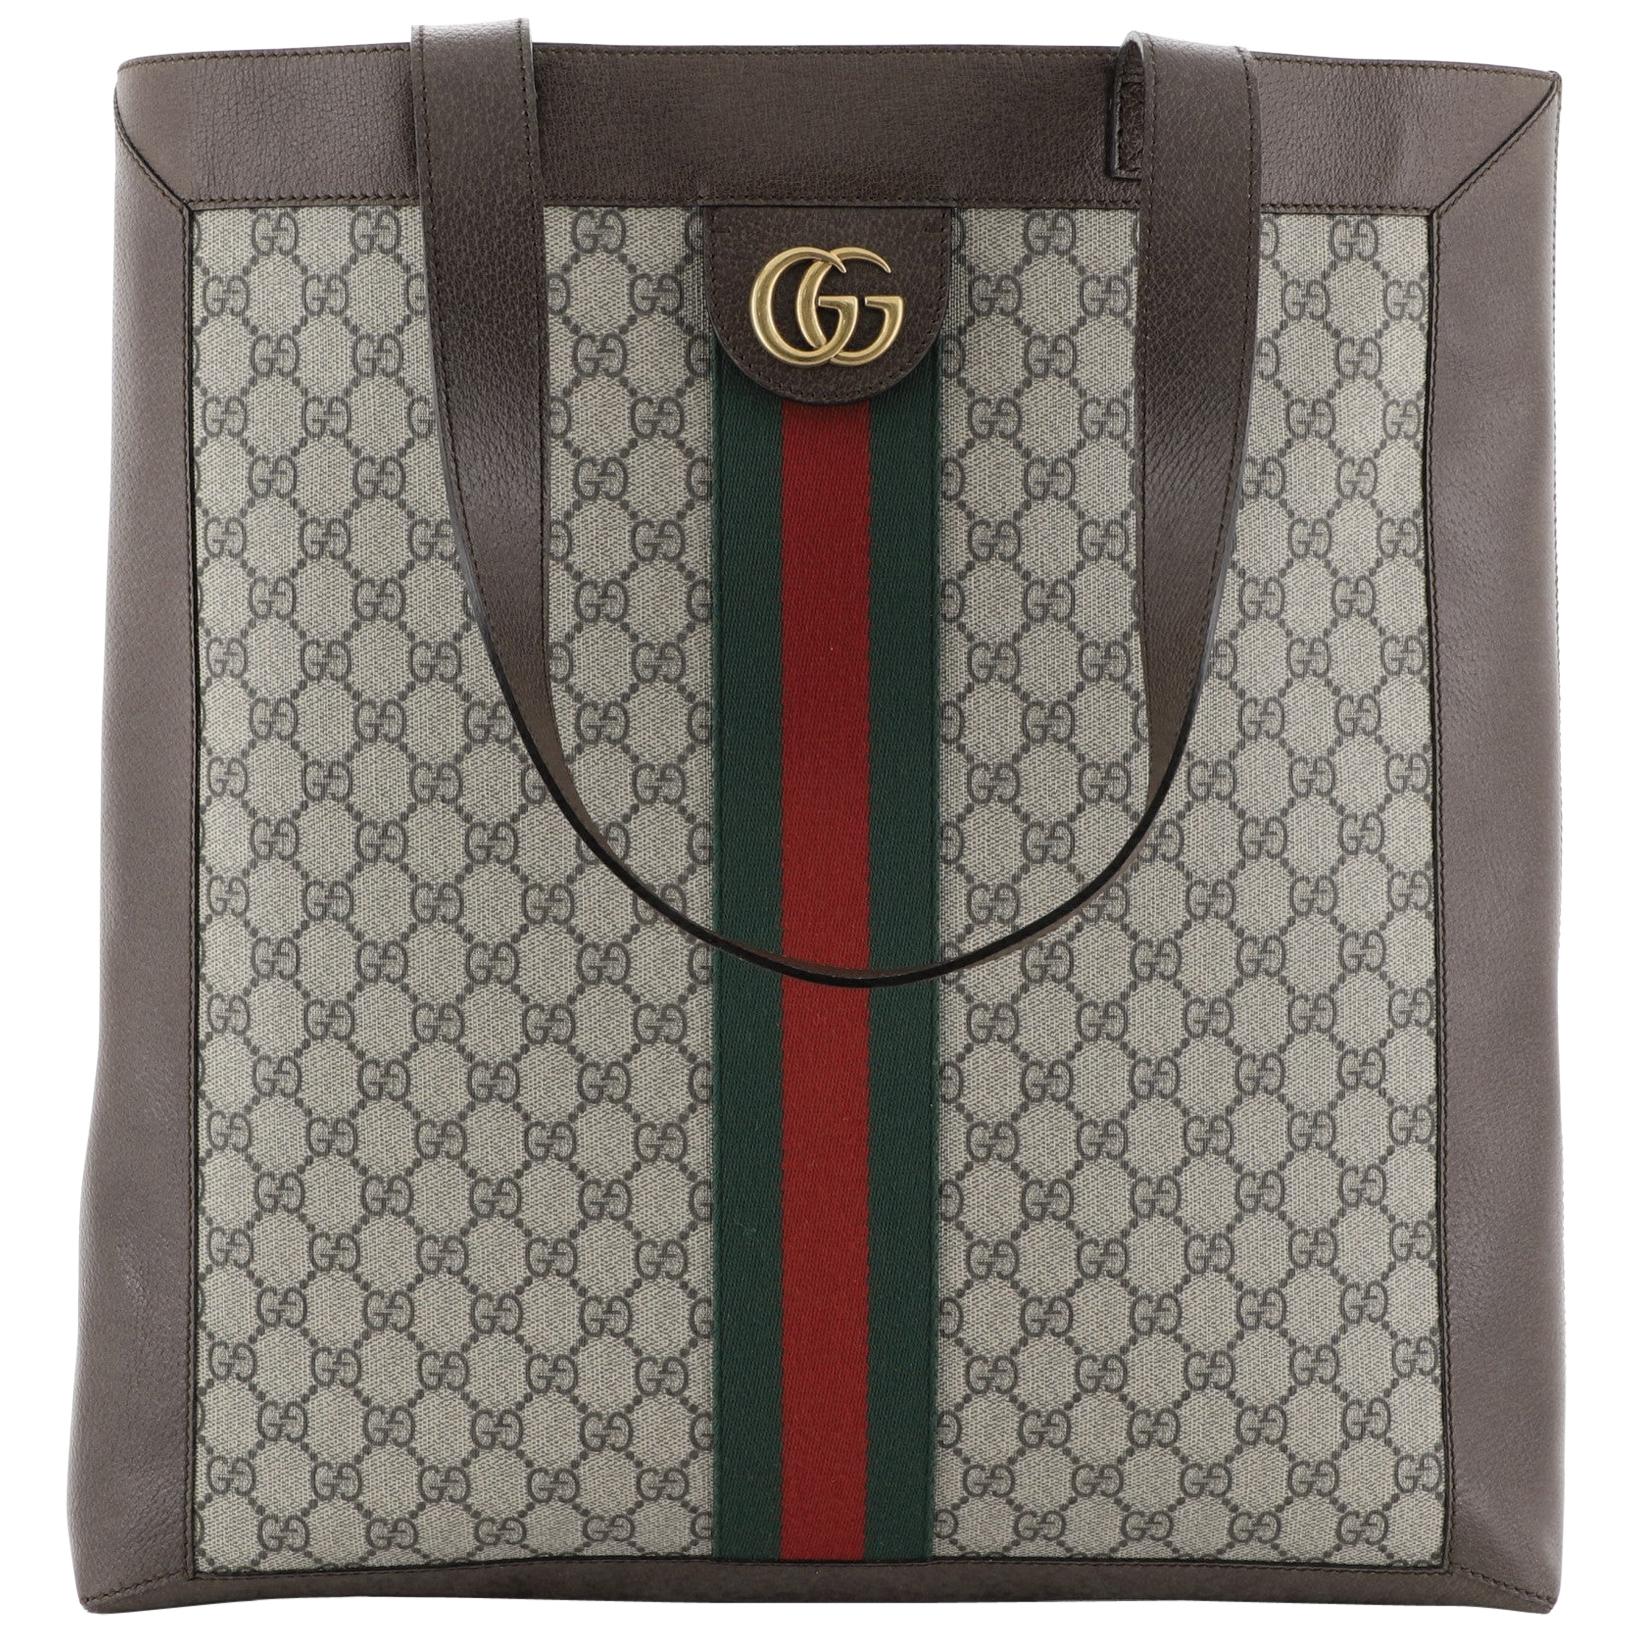 Gucci Ophidia Soft Open Tote GG Coated Canvas Large 